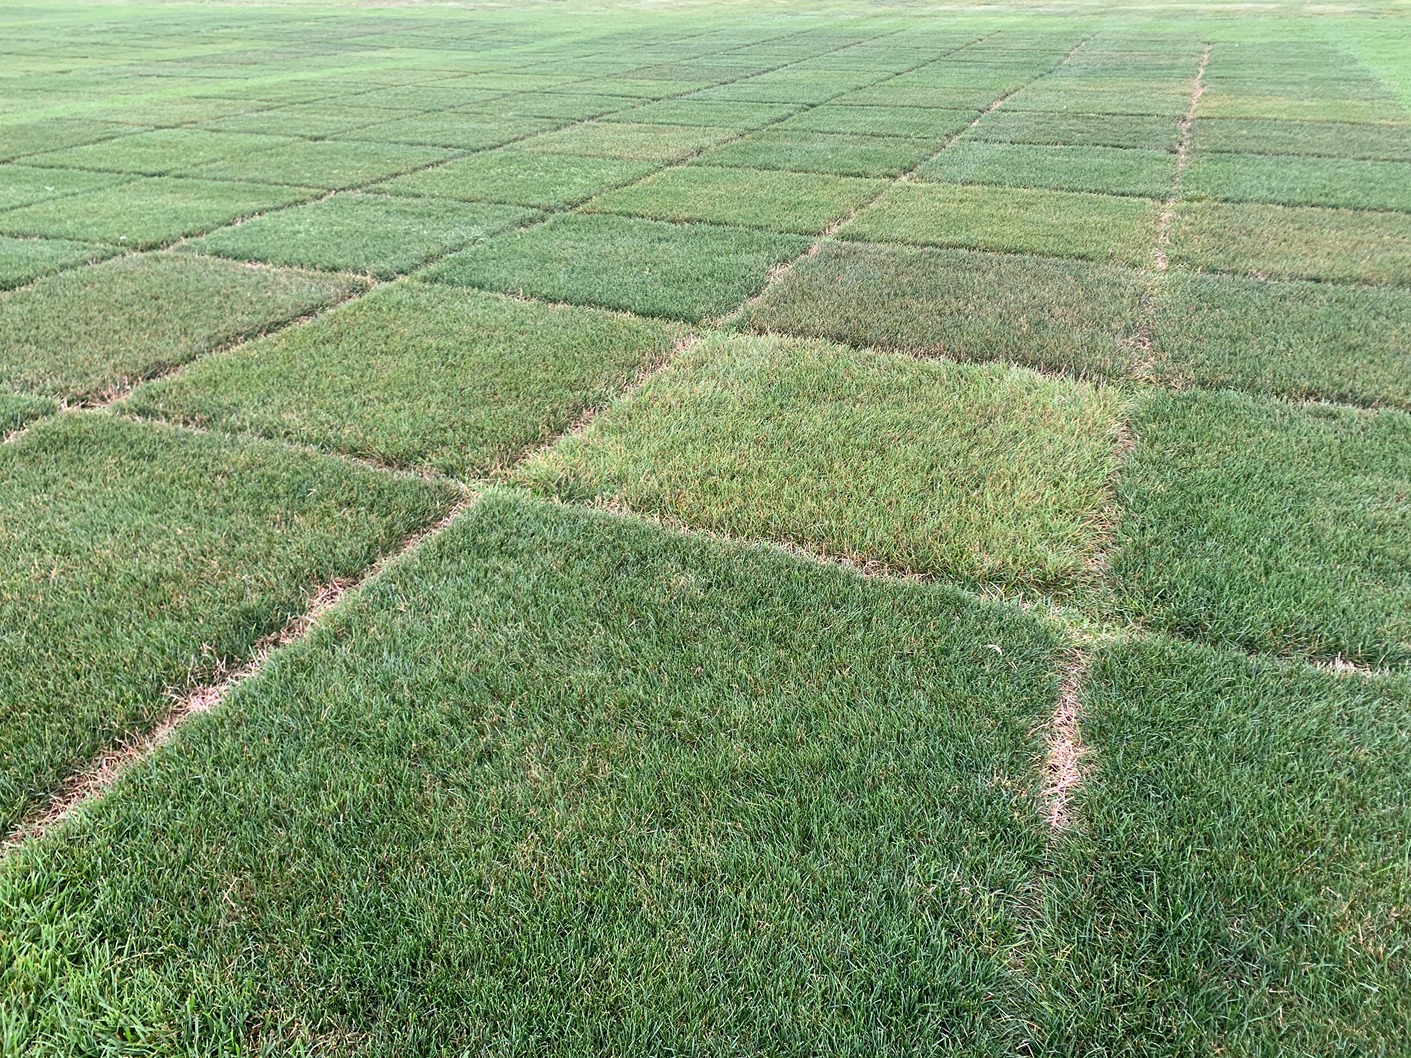 Diversity of high quality and low quality perennial ryegrasses.